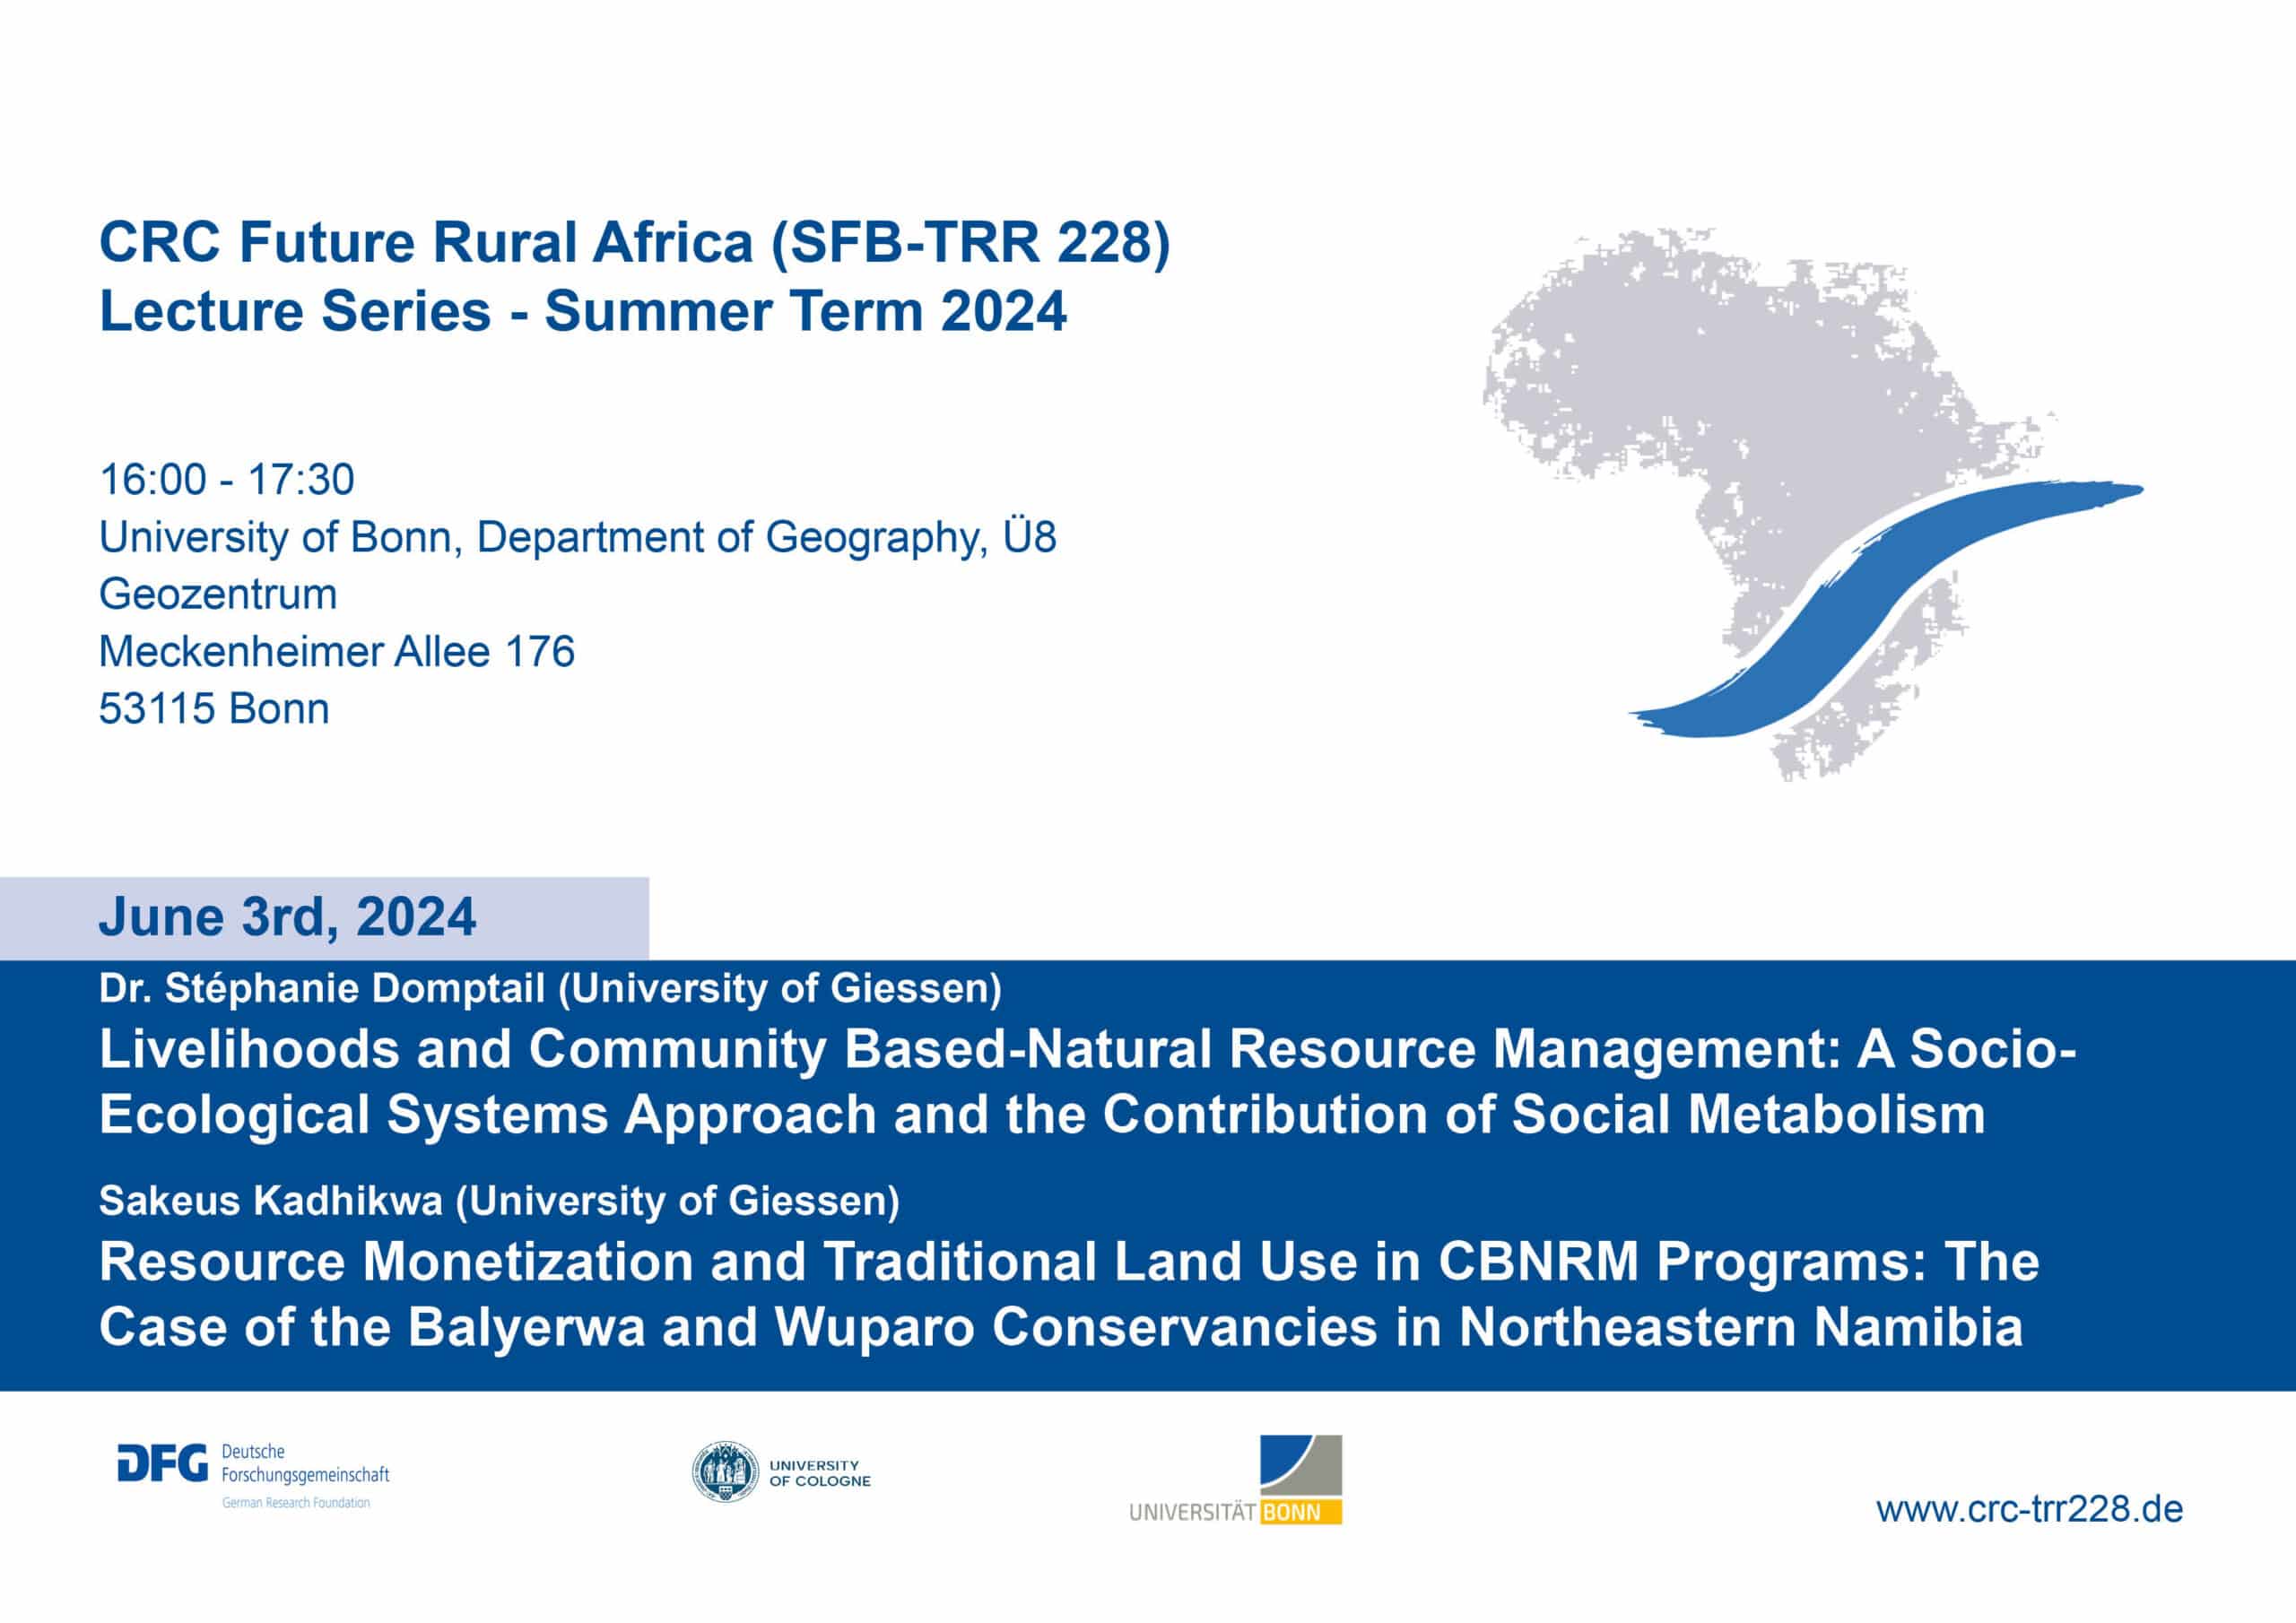 poster for a public lecture by the crc future rural africa